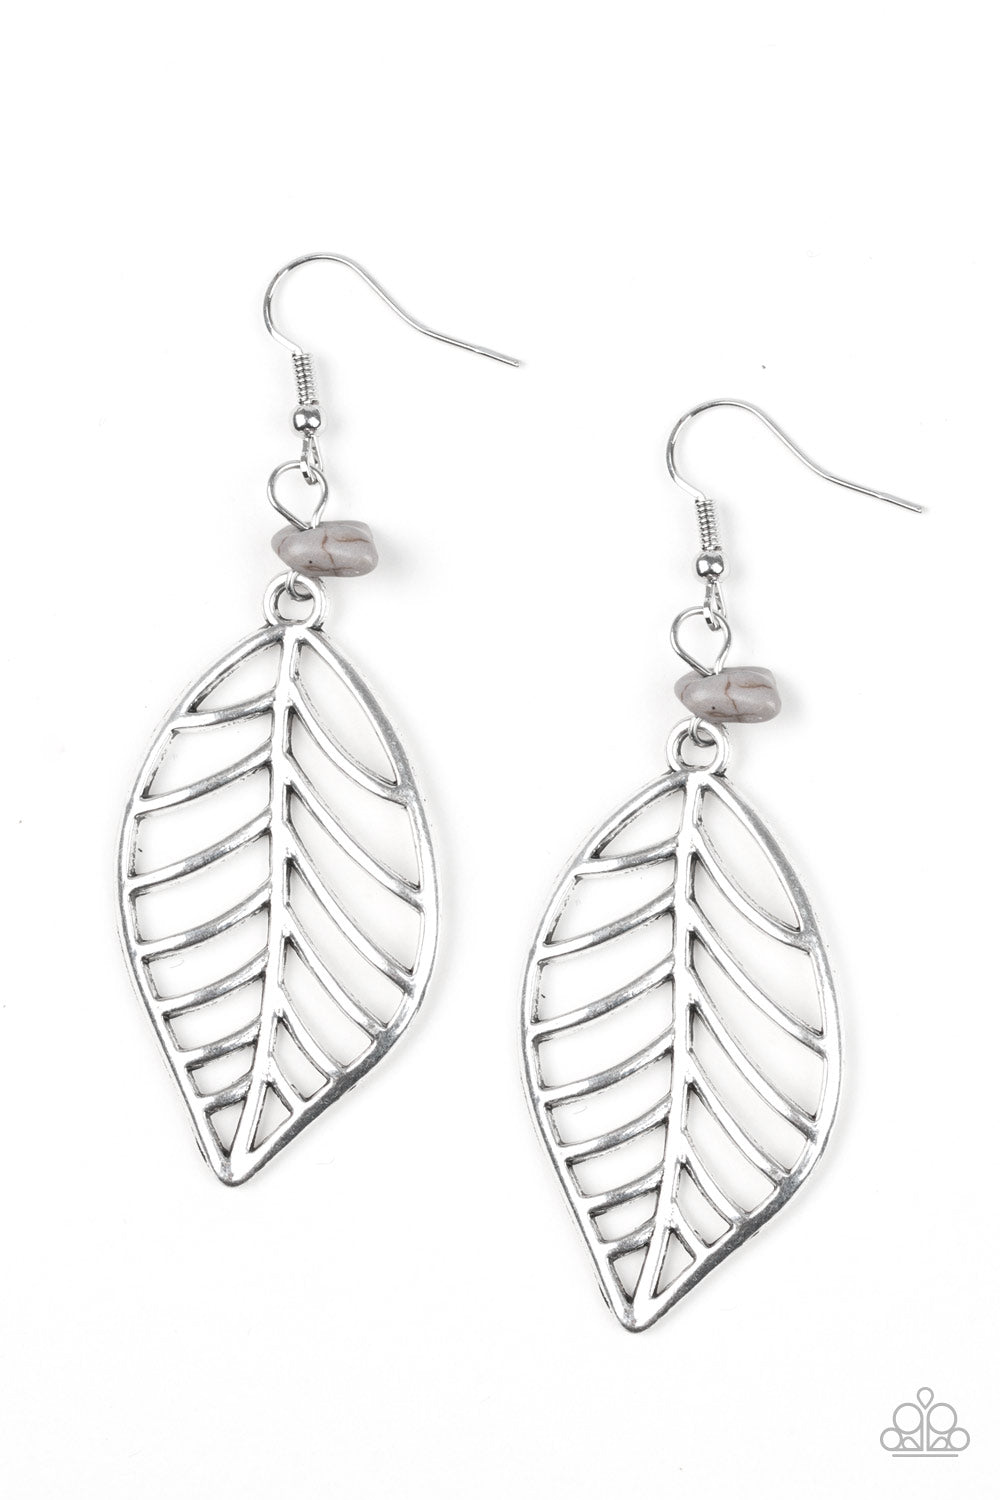 BOUGH Out - Silver Earrings